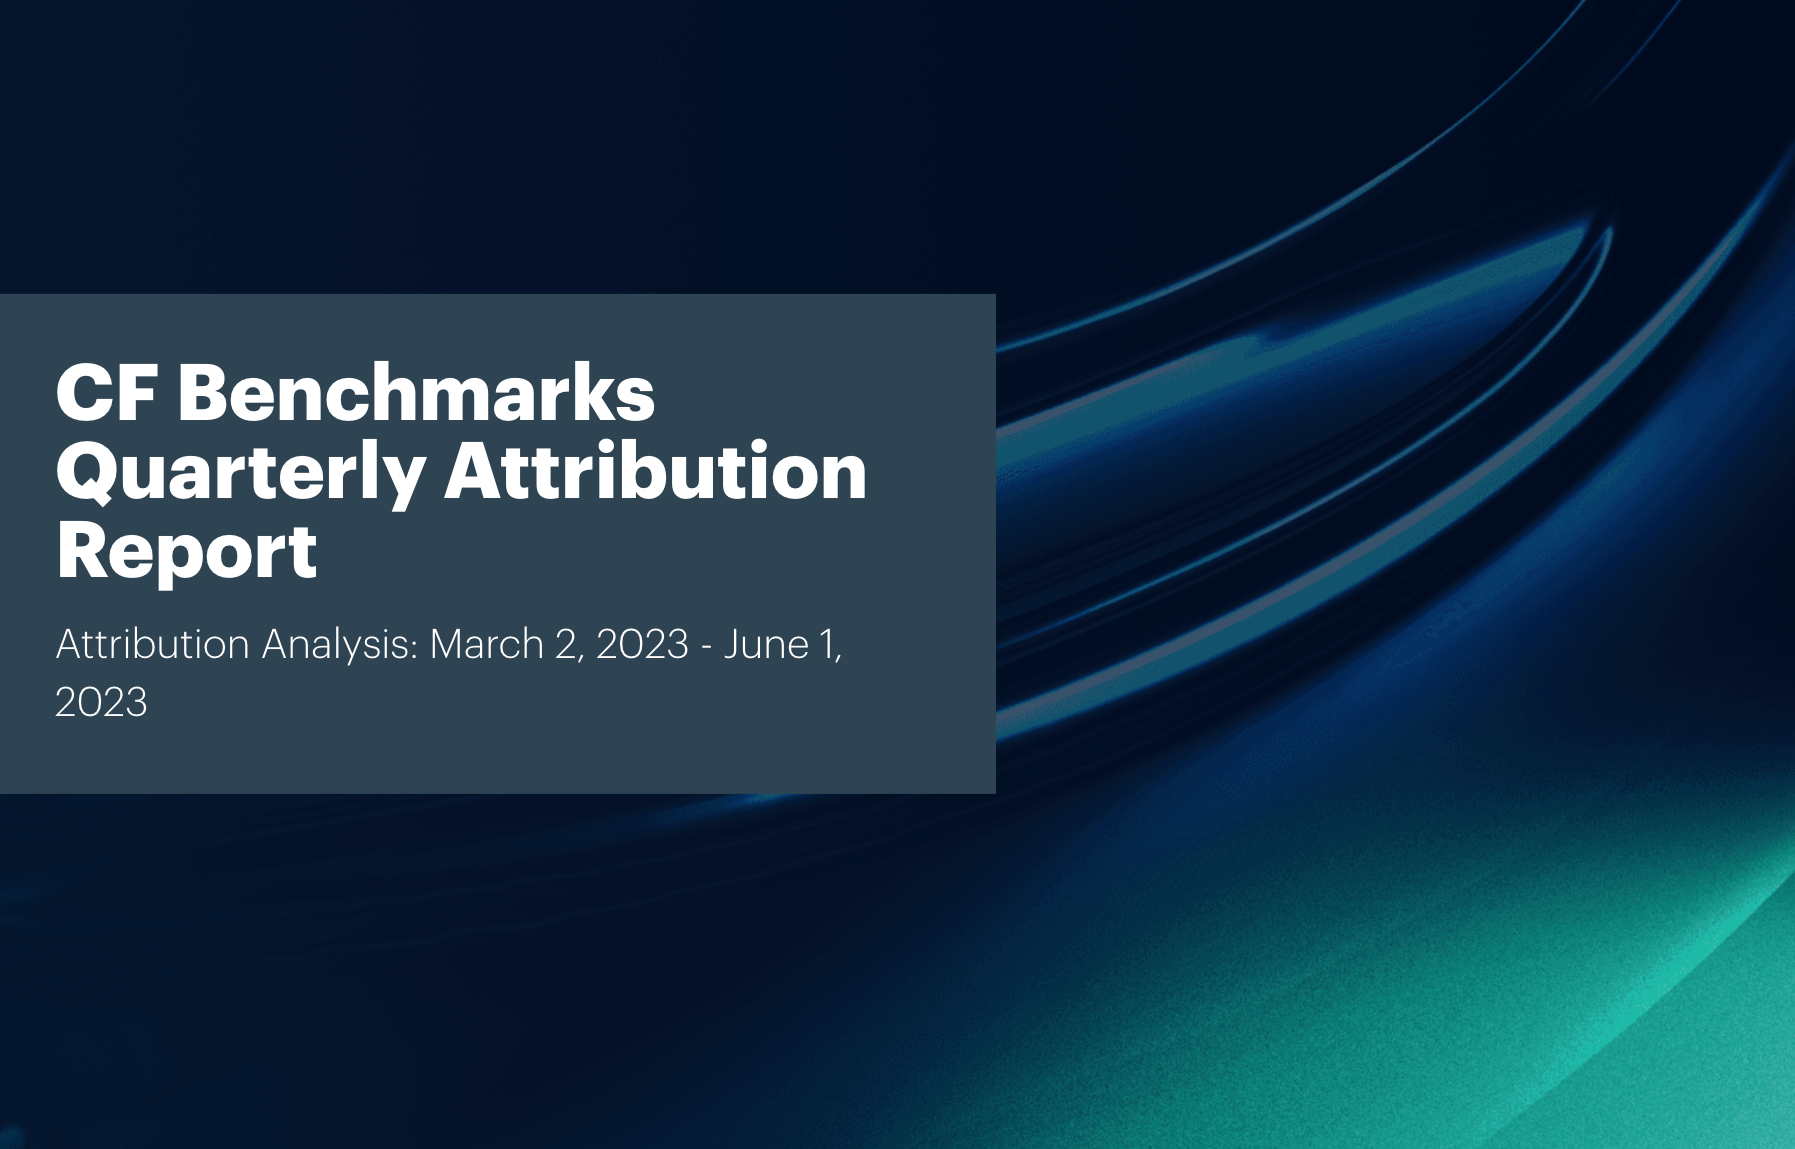 CF Benchmarks Quarterly Attribution Reports - June 2023